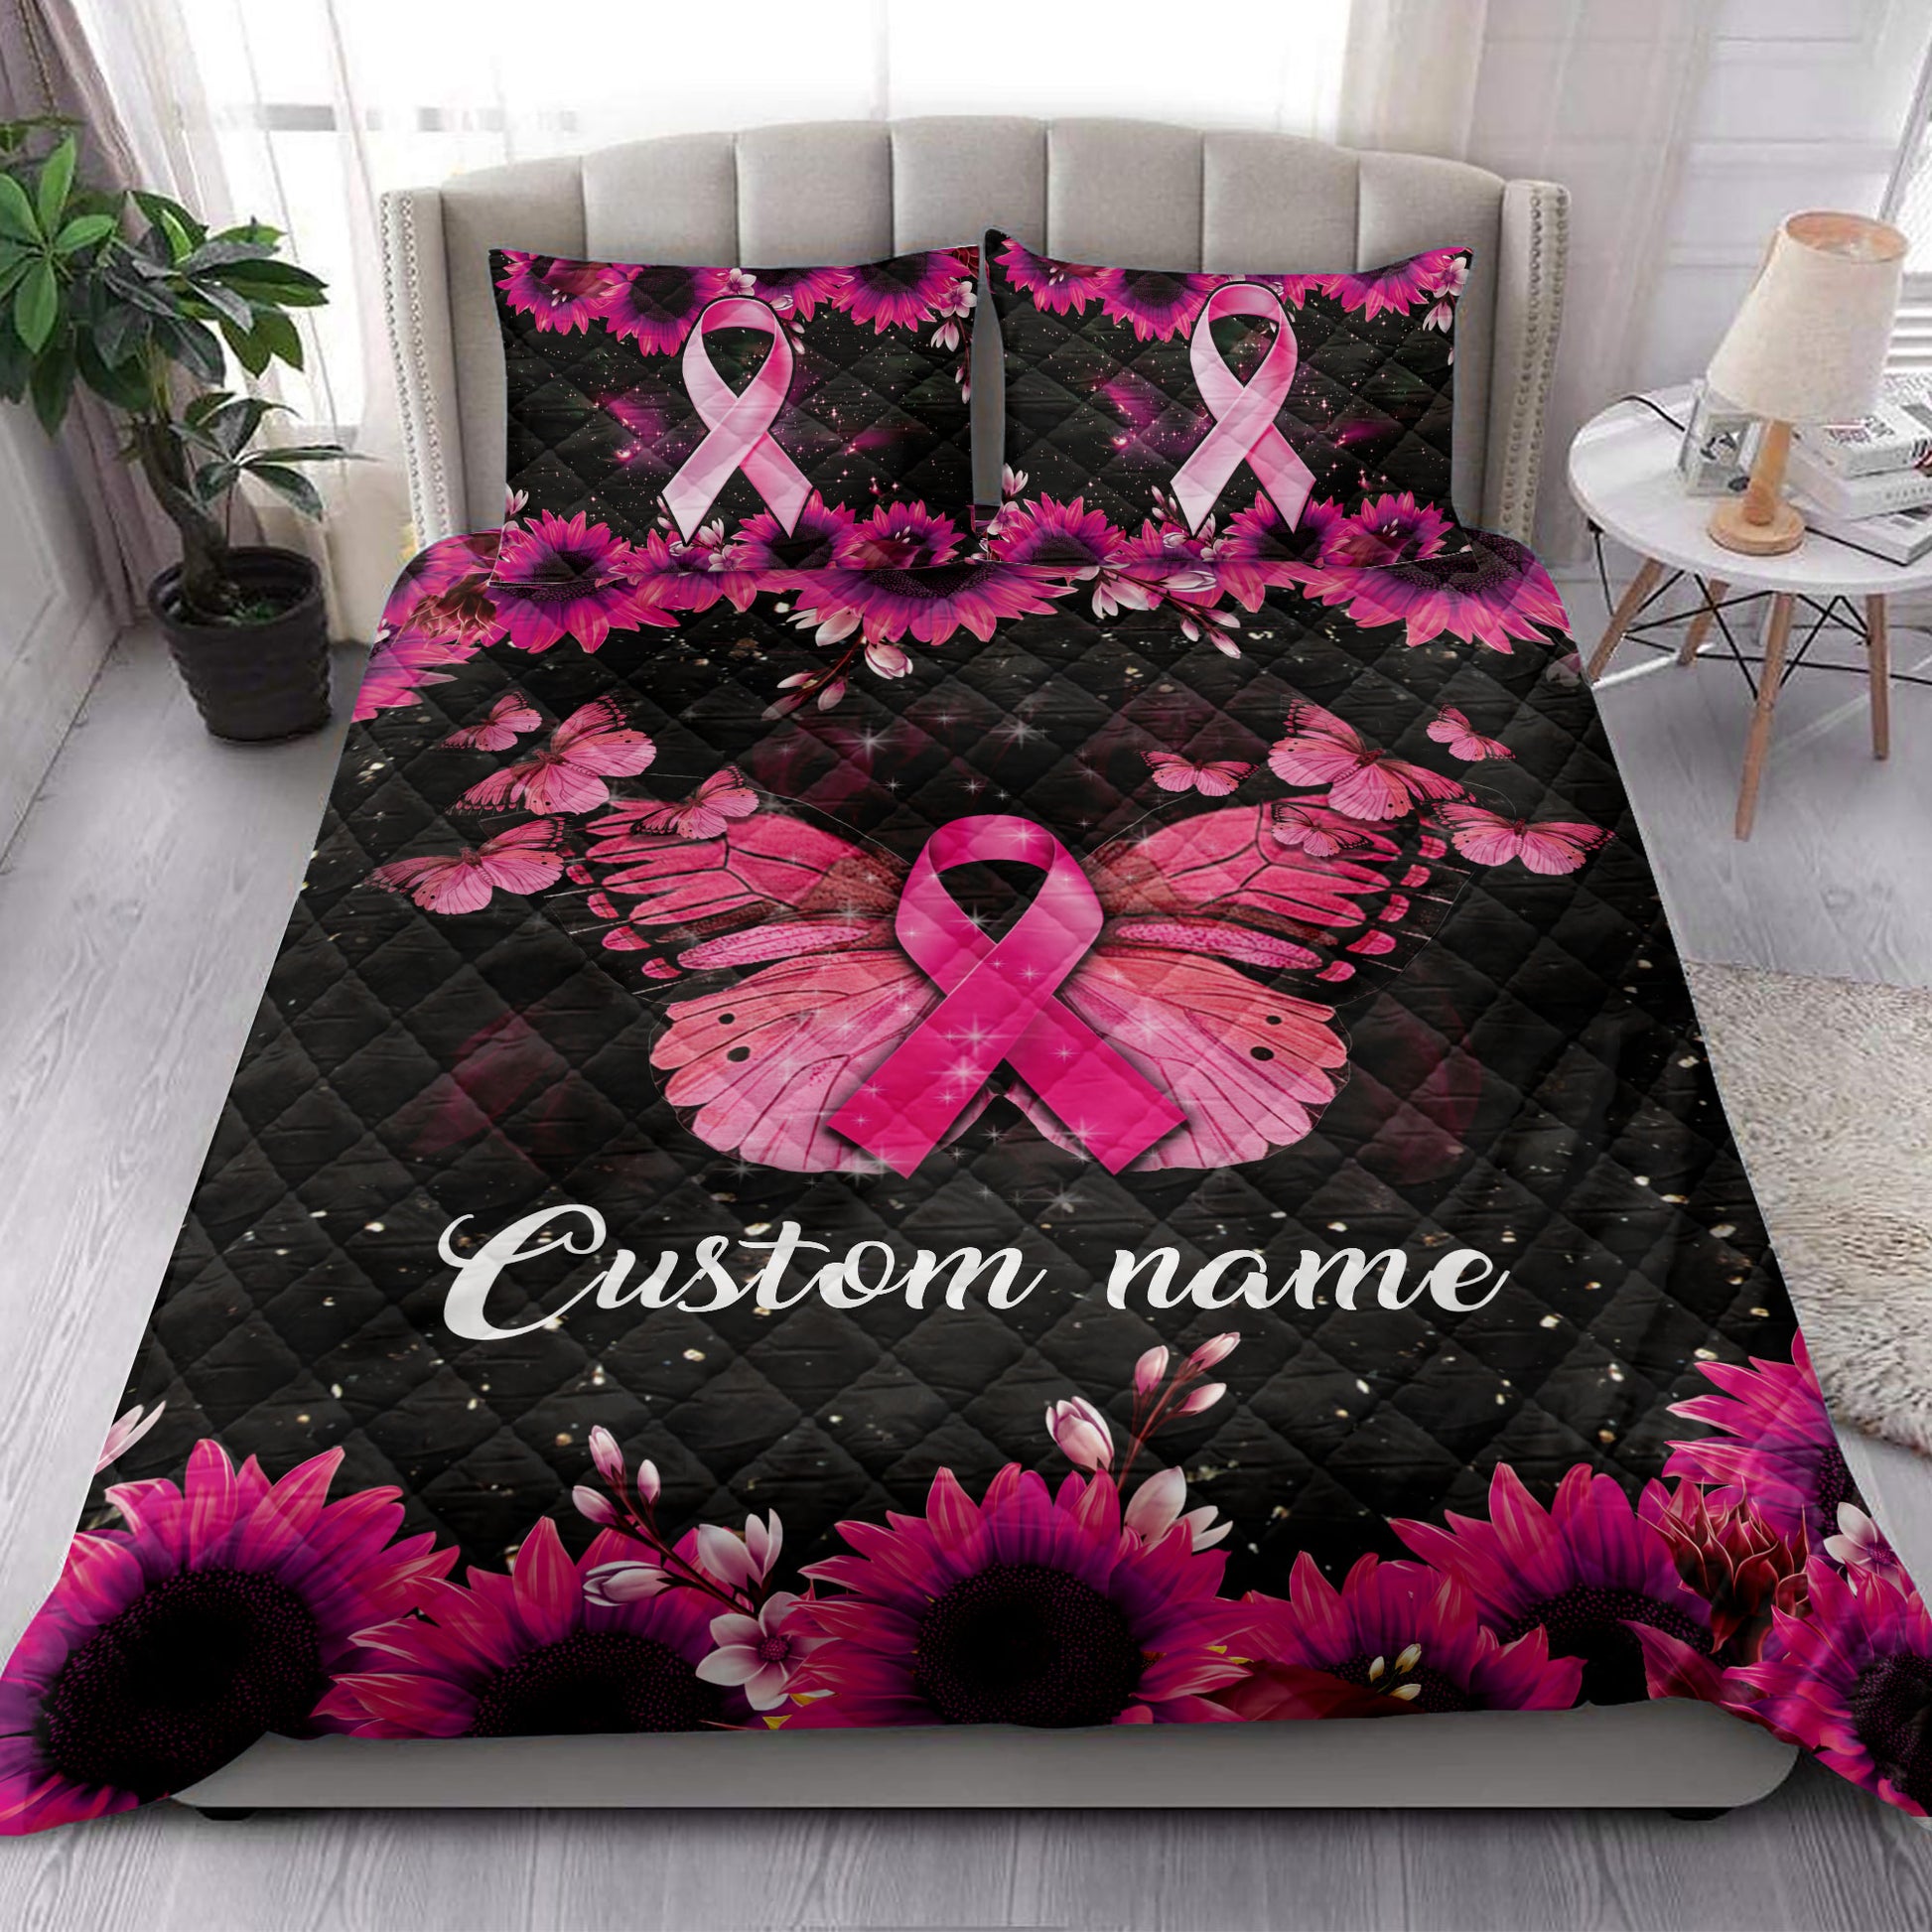 Ohaprints-Quilt-Bed-Set-Pillowcase-Breast-Cancer-Awareness-Pink-Ribbon-Custom-Personalized-Name-Blanket-Bedspread-Bedding-3864-King (90'' x 100'')